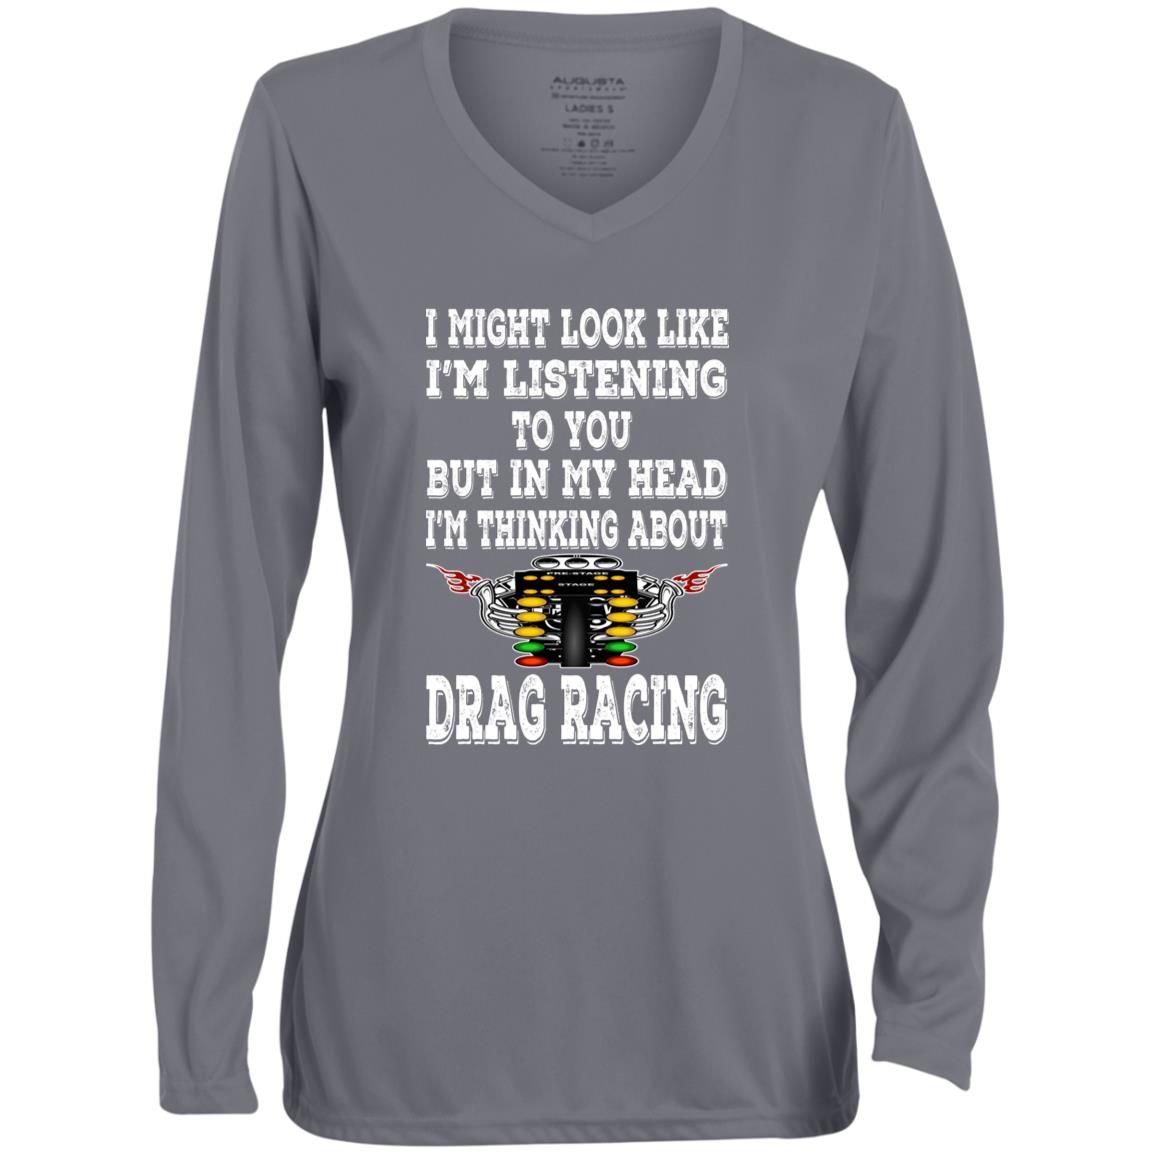 I Might look Like I'm Listening To You Drag Racing Ladies' Moisture-Wicking Long Sleeve V-Neck Tee